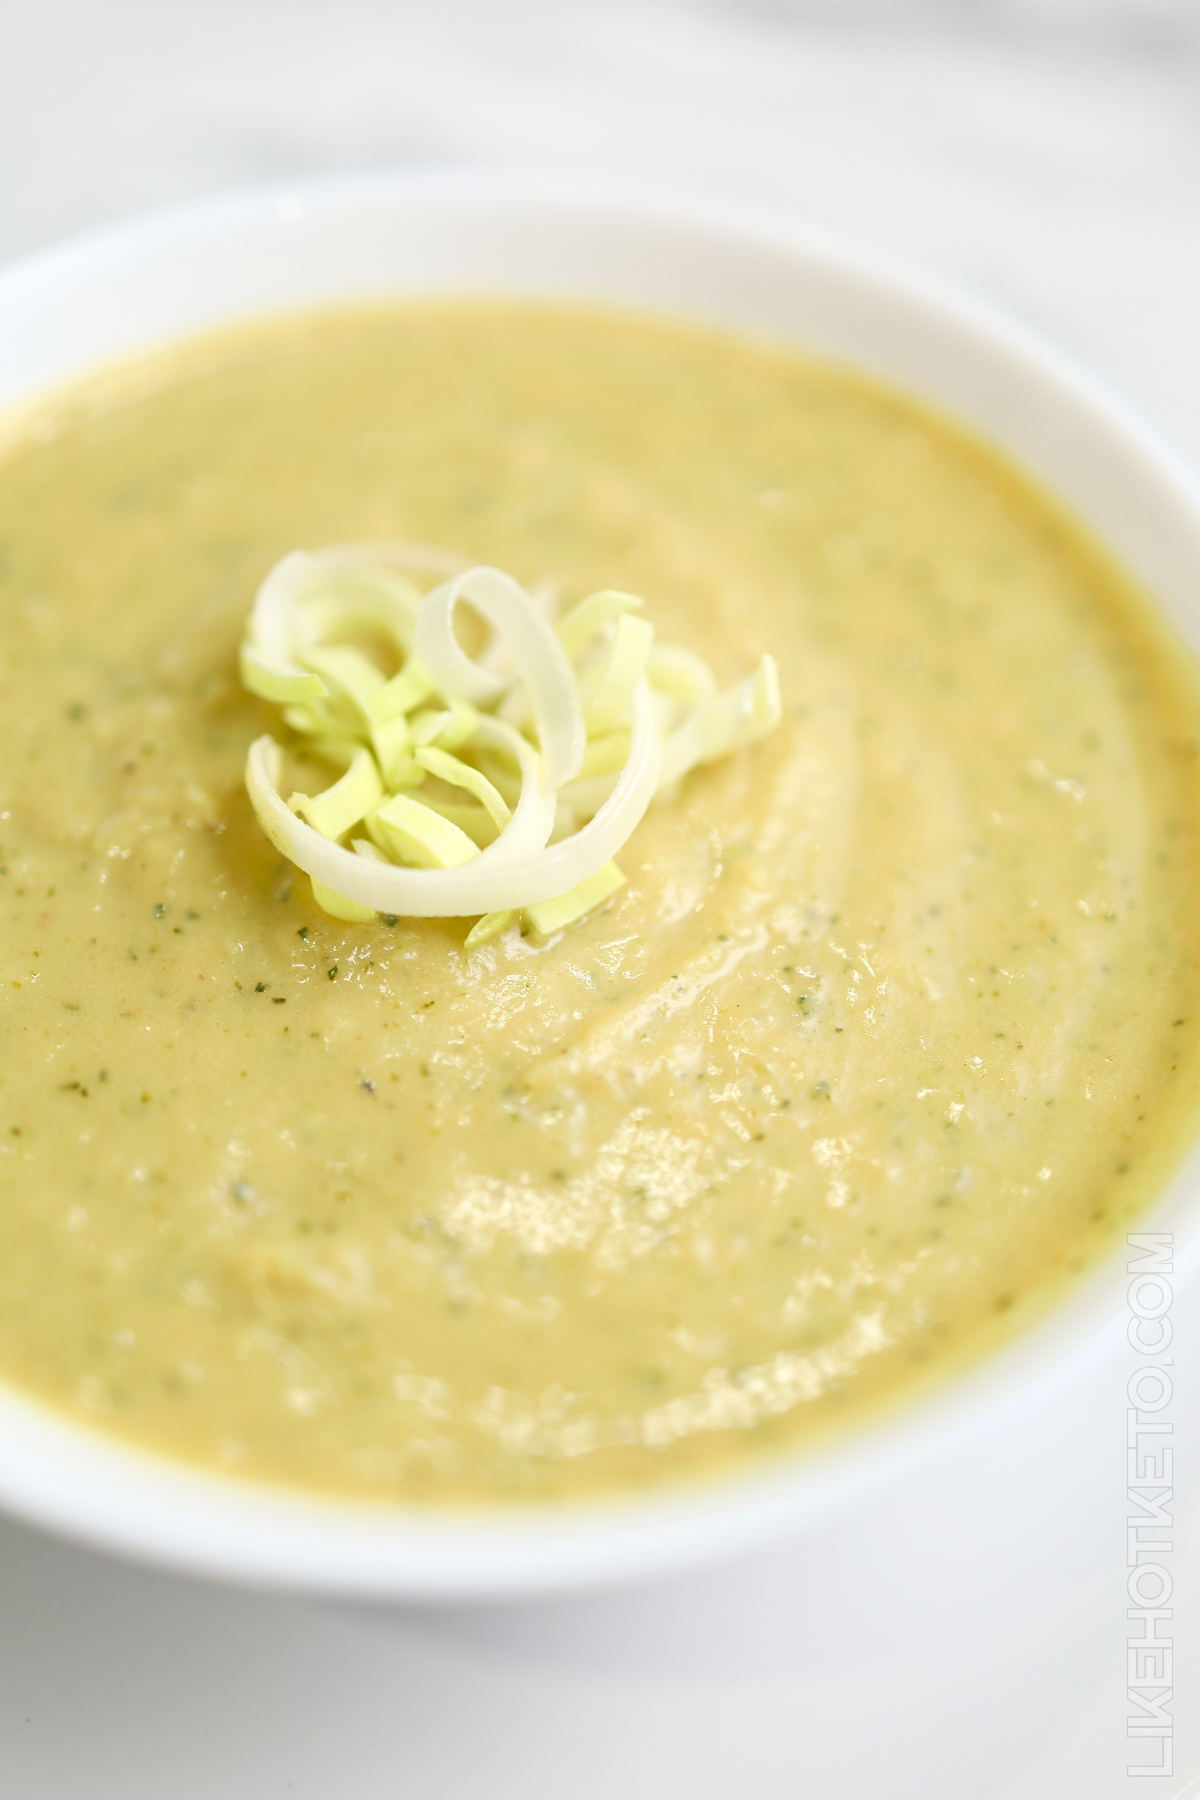 Bowl of zucchini and pea protein soup garnished with leeks.